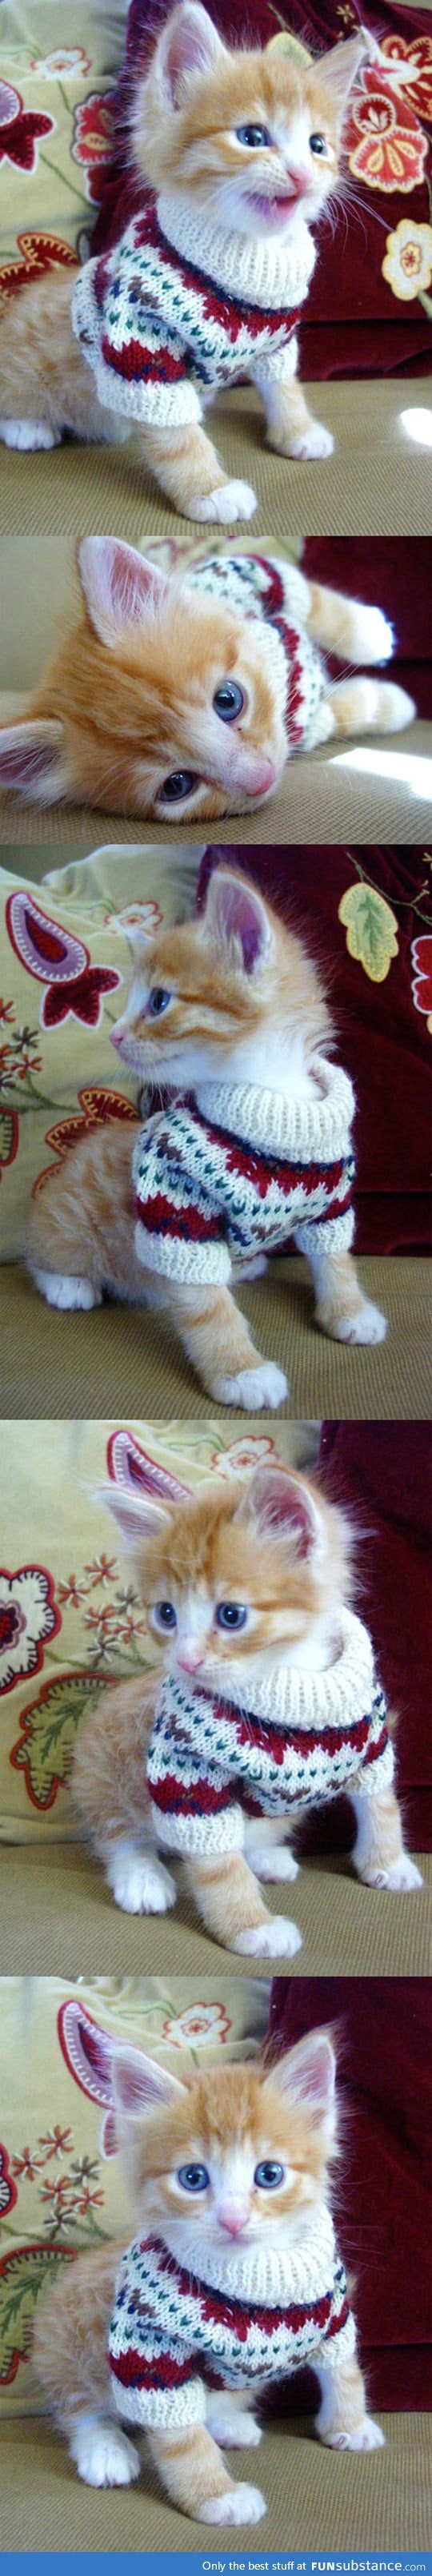 Kitty in a sweater